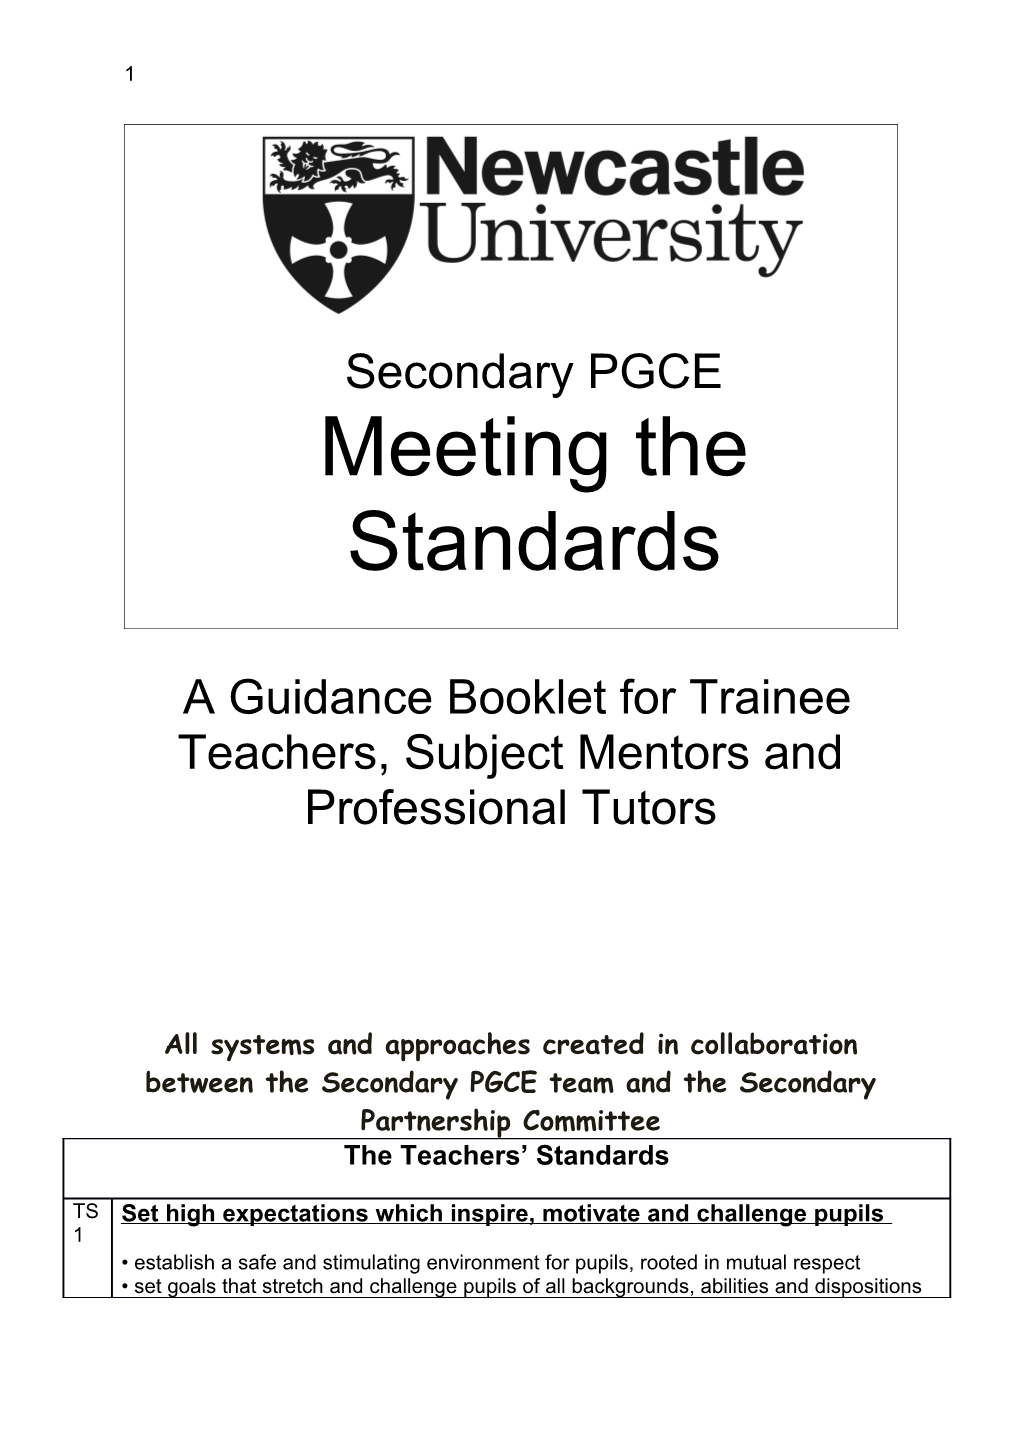 A Guidance Booklet for Trainee Teachers, Subject Mentors and Professional Tutors